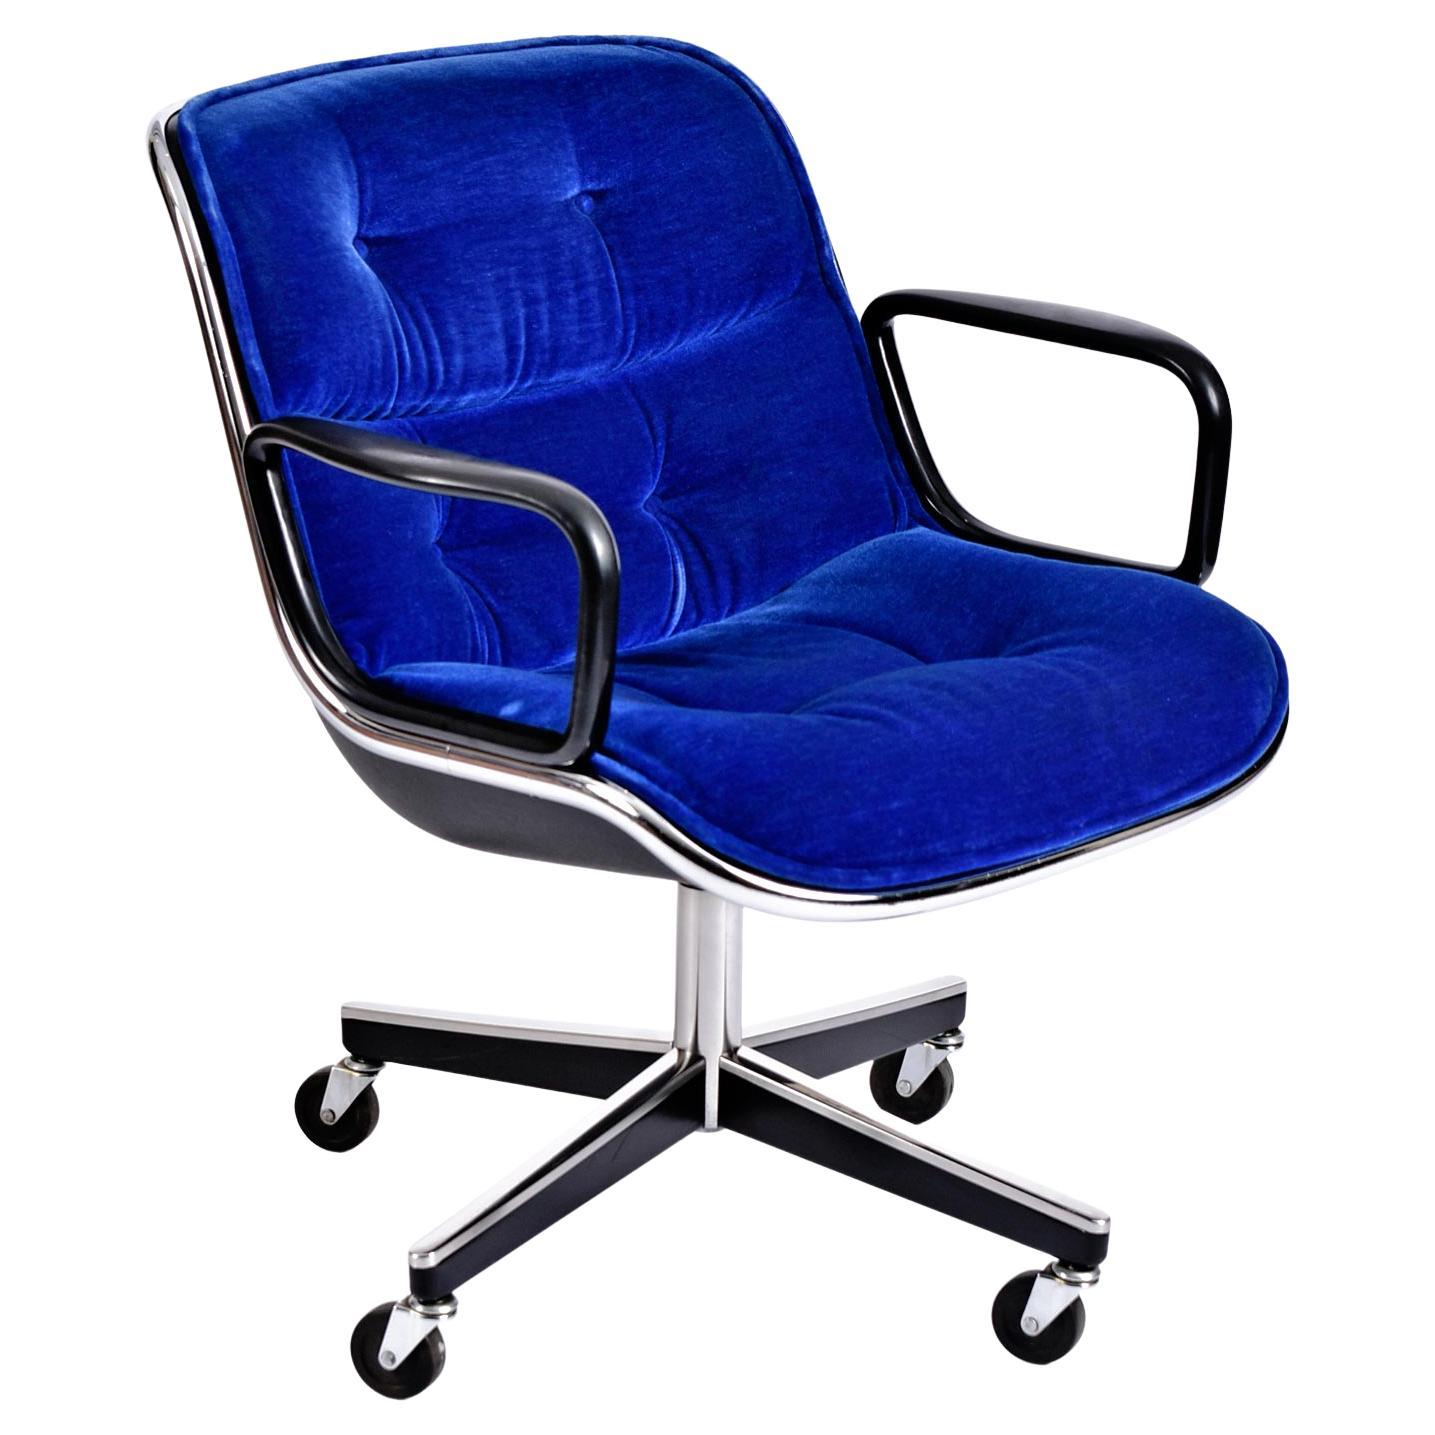 Blue Velvet Executive Chair Charles Pollock for Knoll with Height Tension Knob